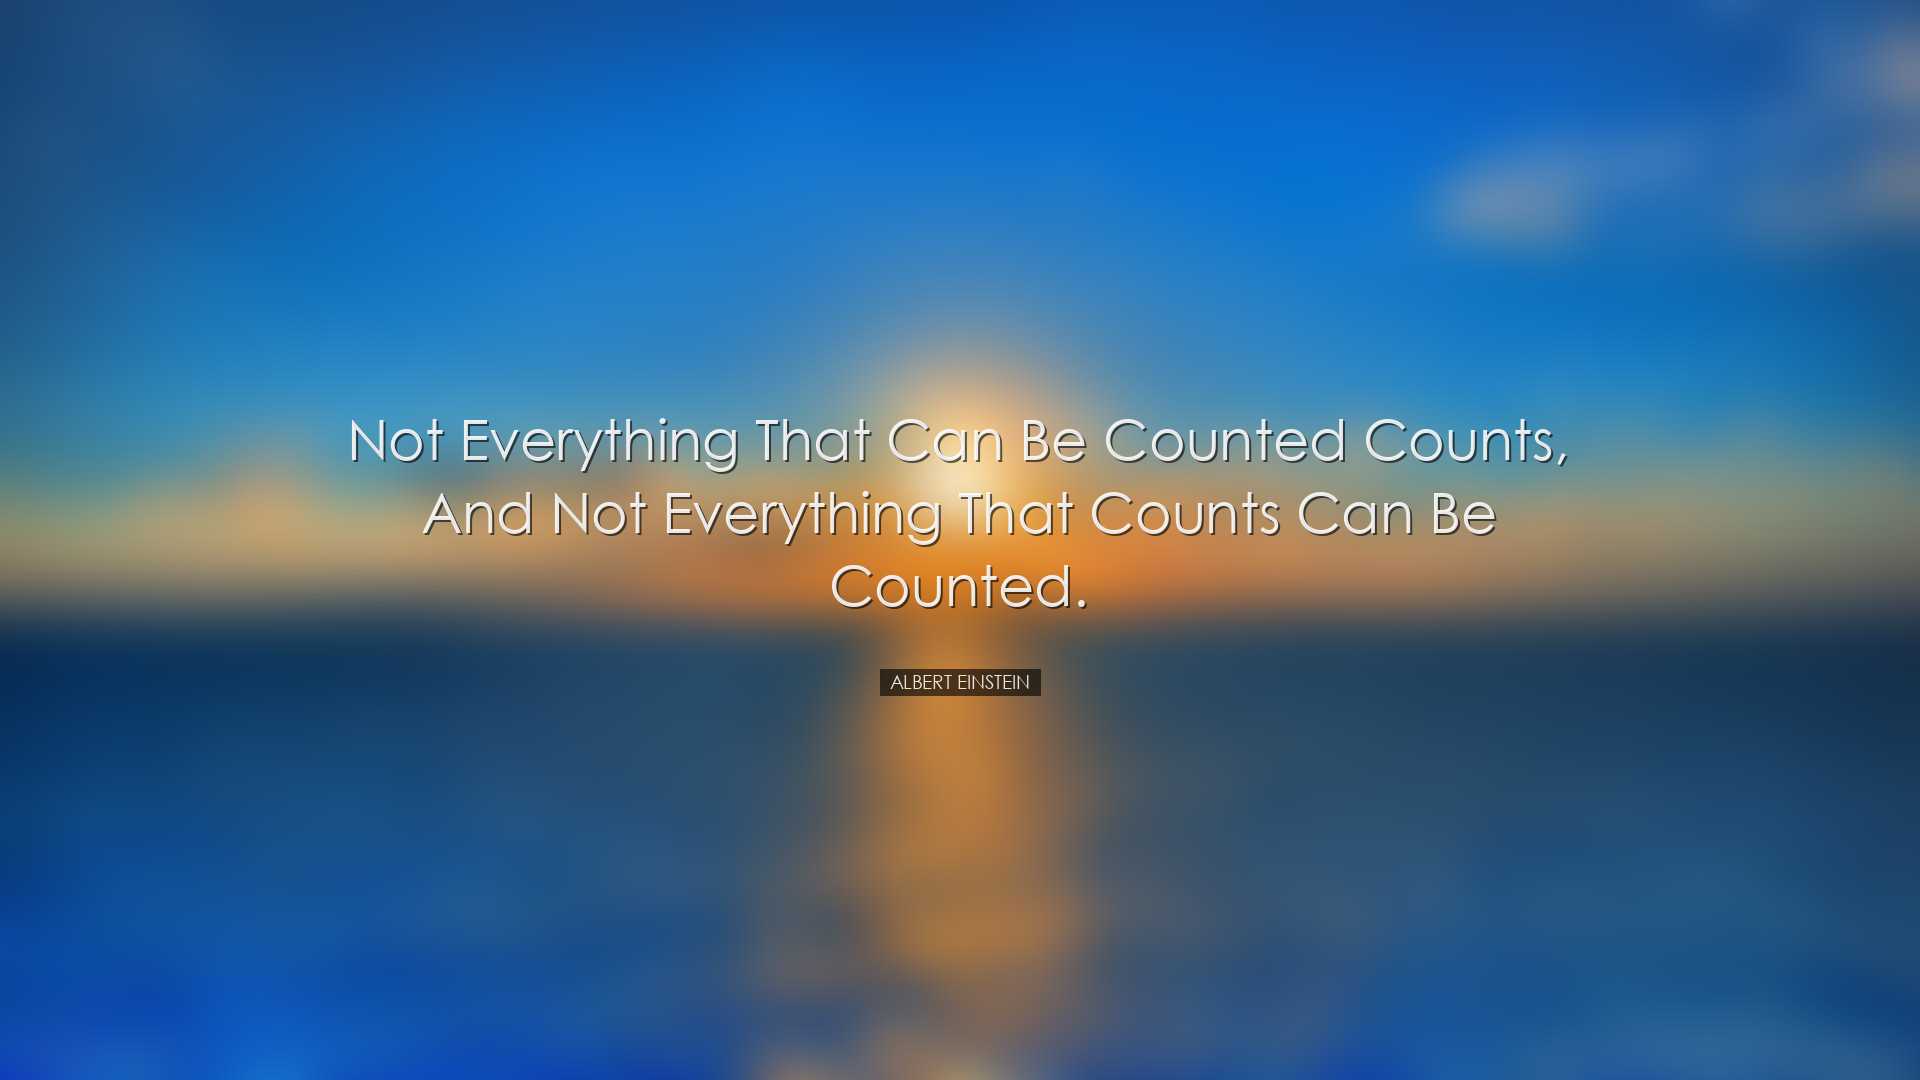 Not everything that can be counted counts, and not everything that